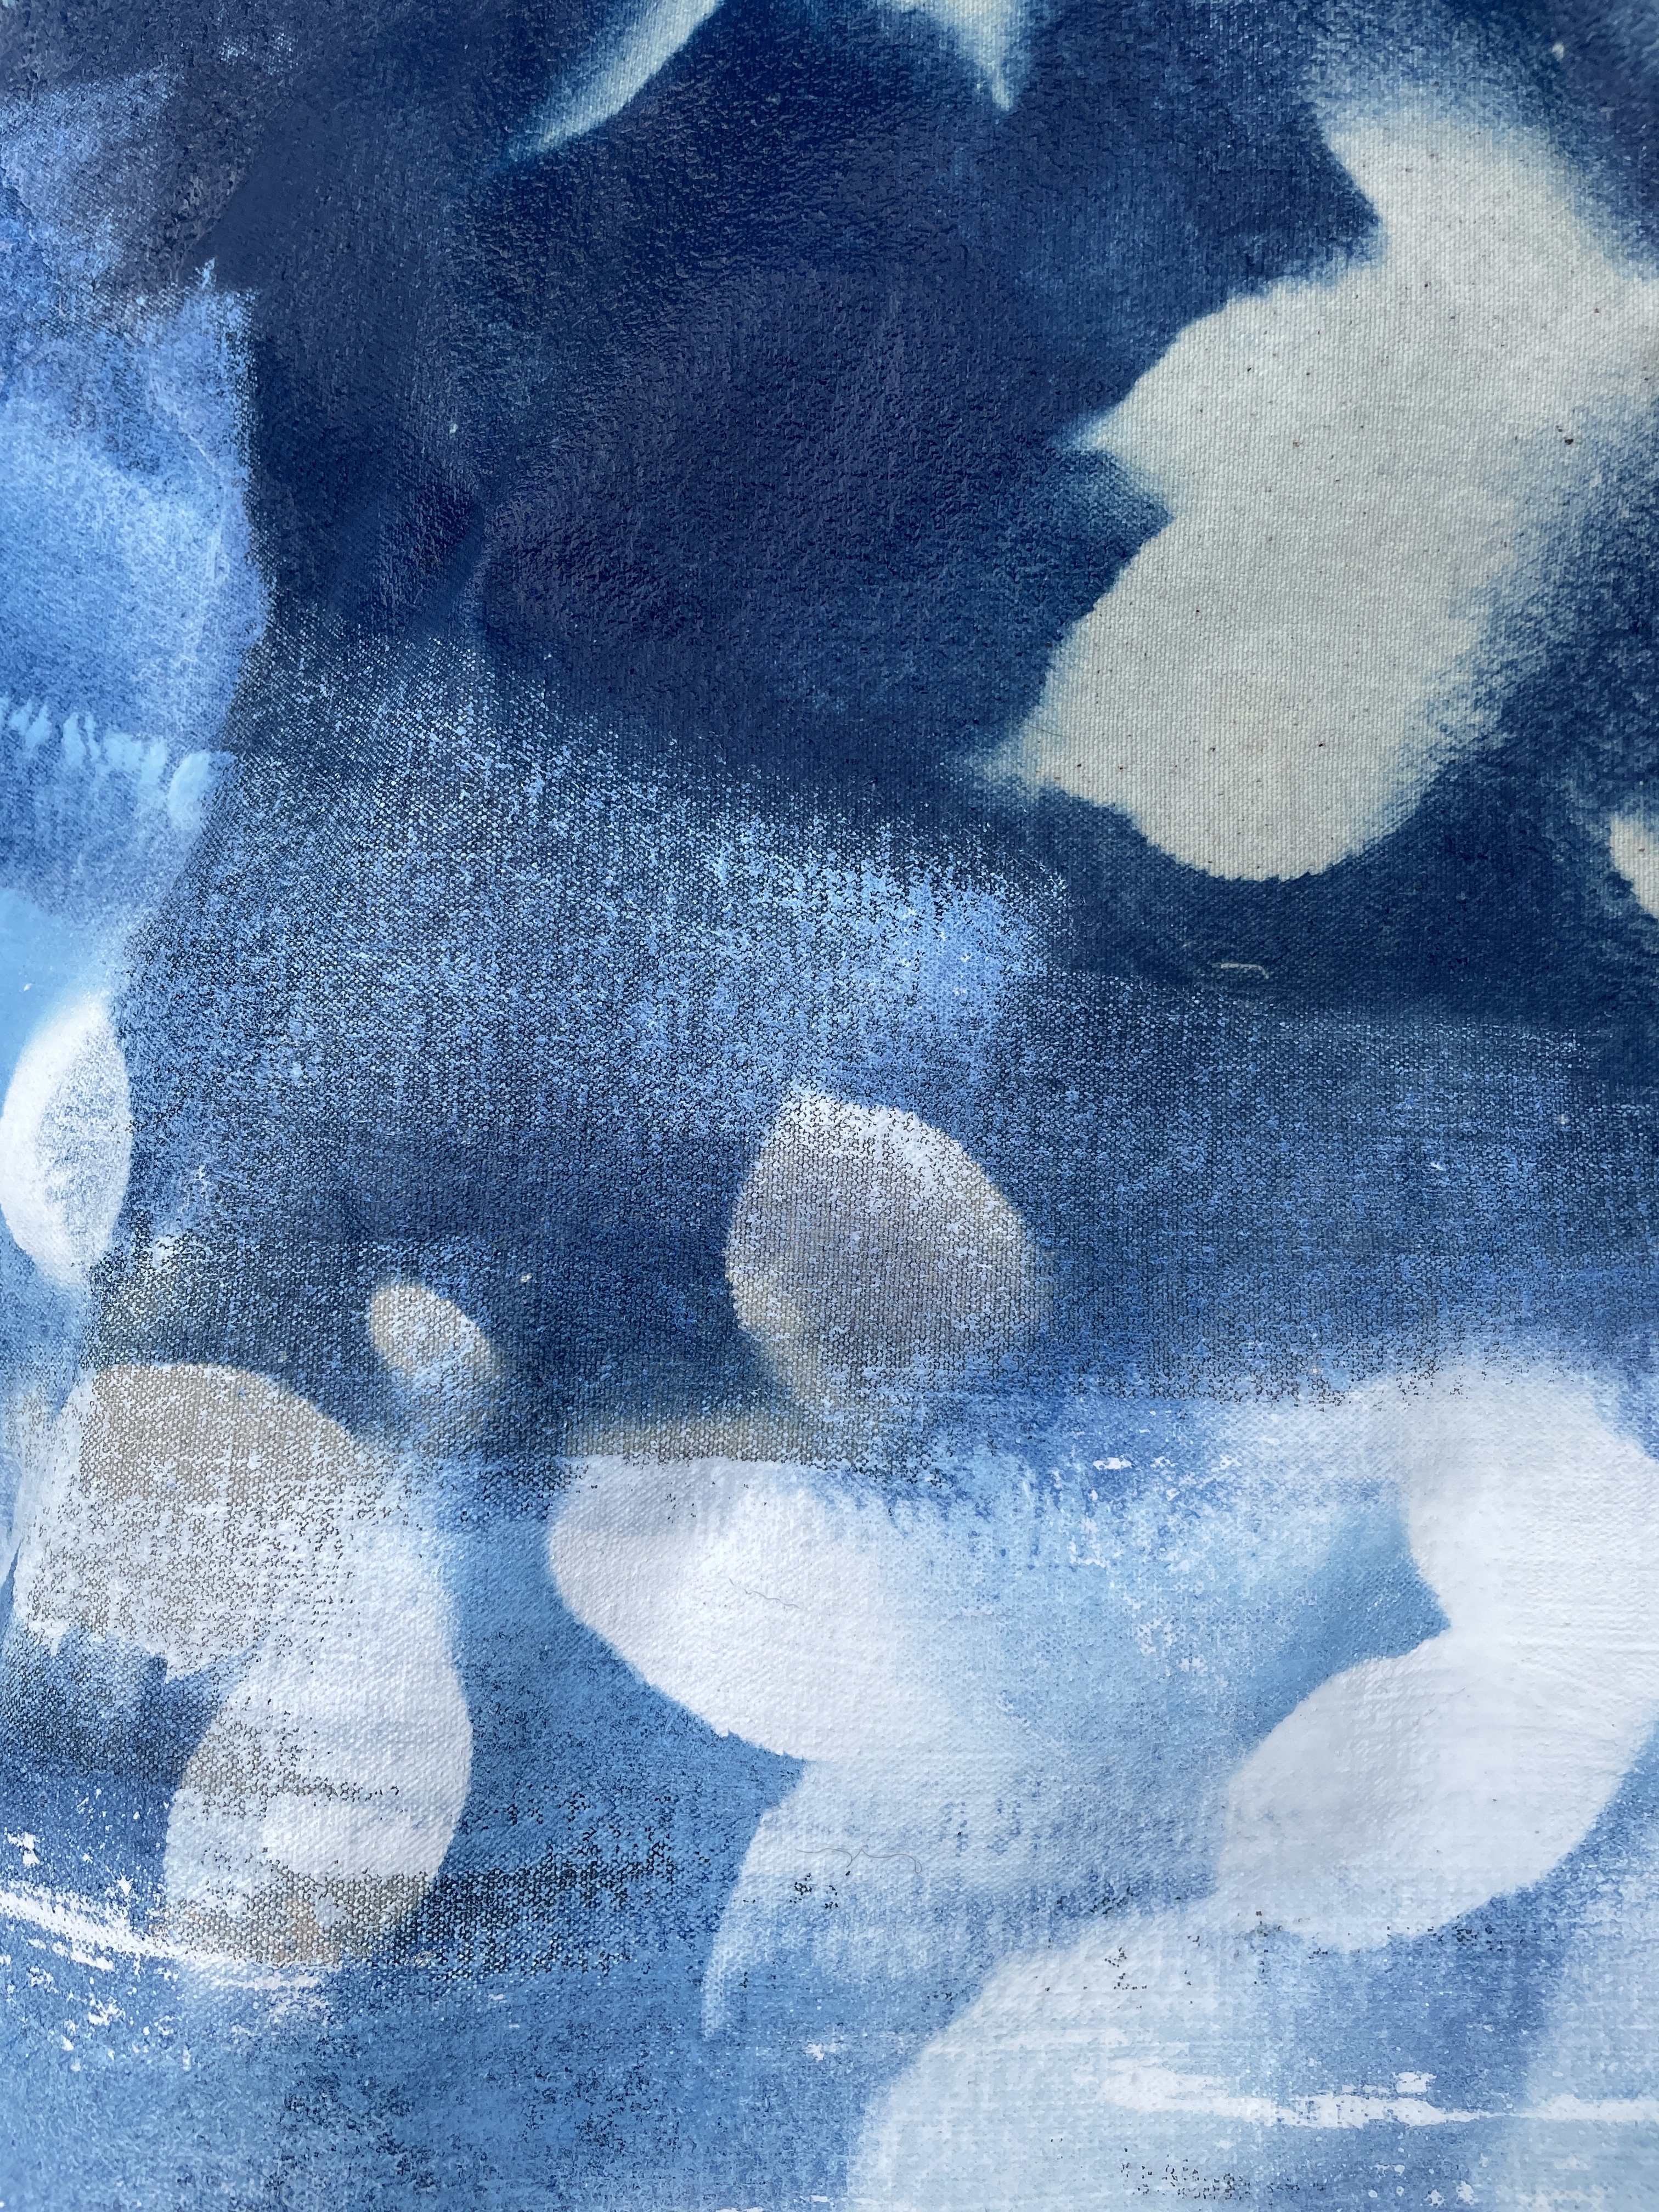 Artful Cyanotypes - Cyanotypes on fabric and playing with pattern